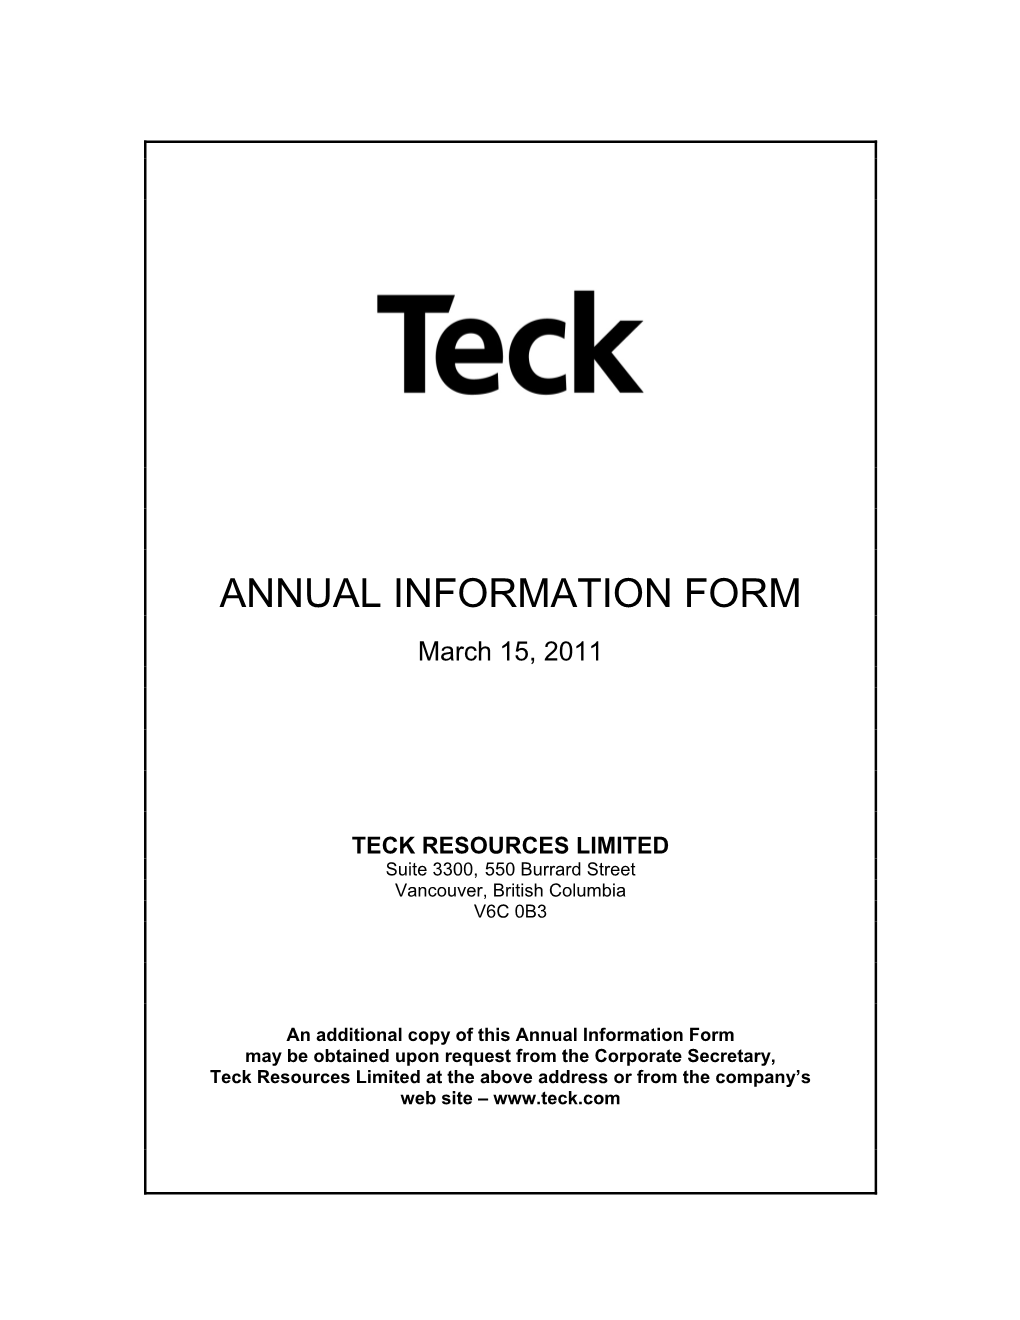 ANNUAL INFORMATION FORM March 15, 2011